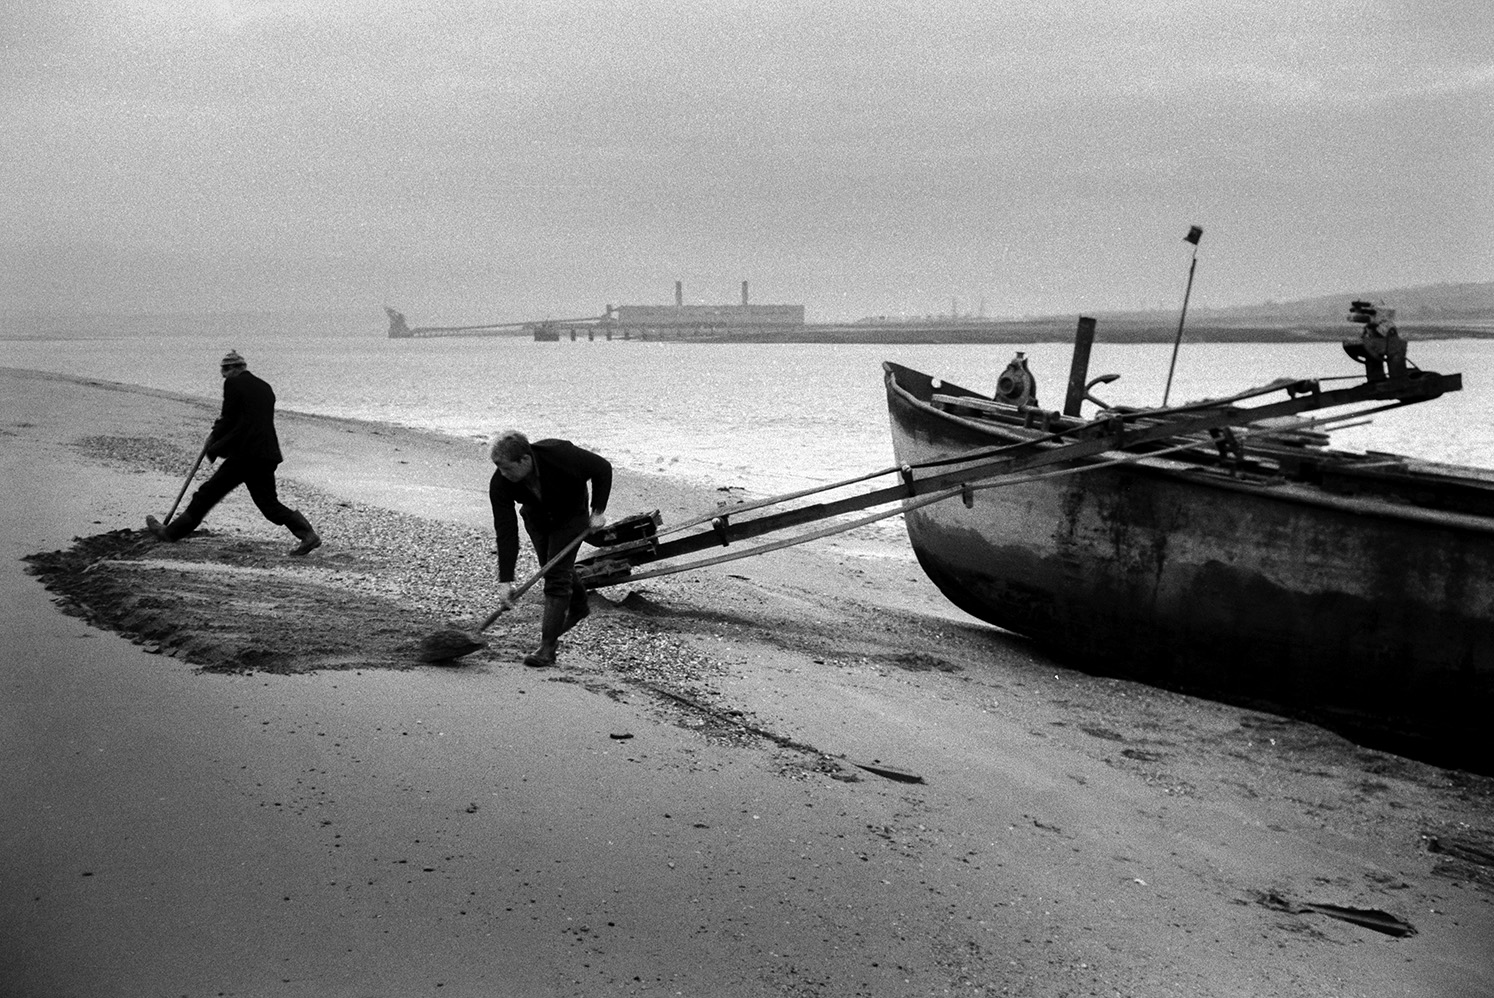 Men shovelling sand from the beach onto a conveyor belt or elevator attached to a sand barge at Crow Point, Braunton. The Taw River estuary can be seen in the background, as well as Yelland Power Station at Instow.